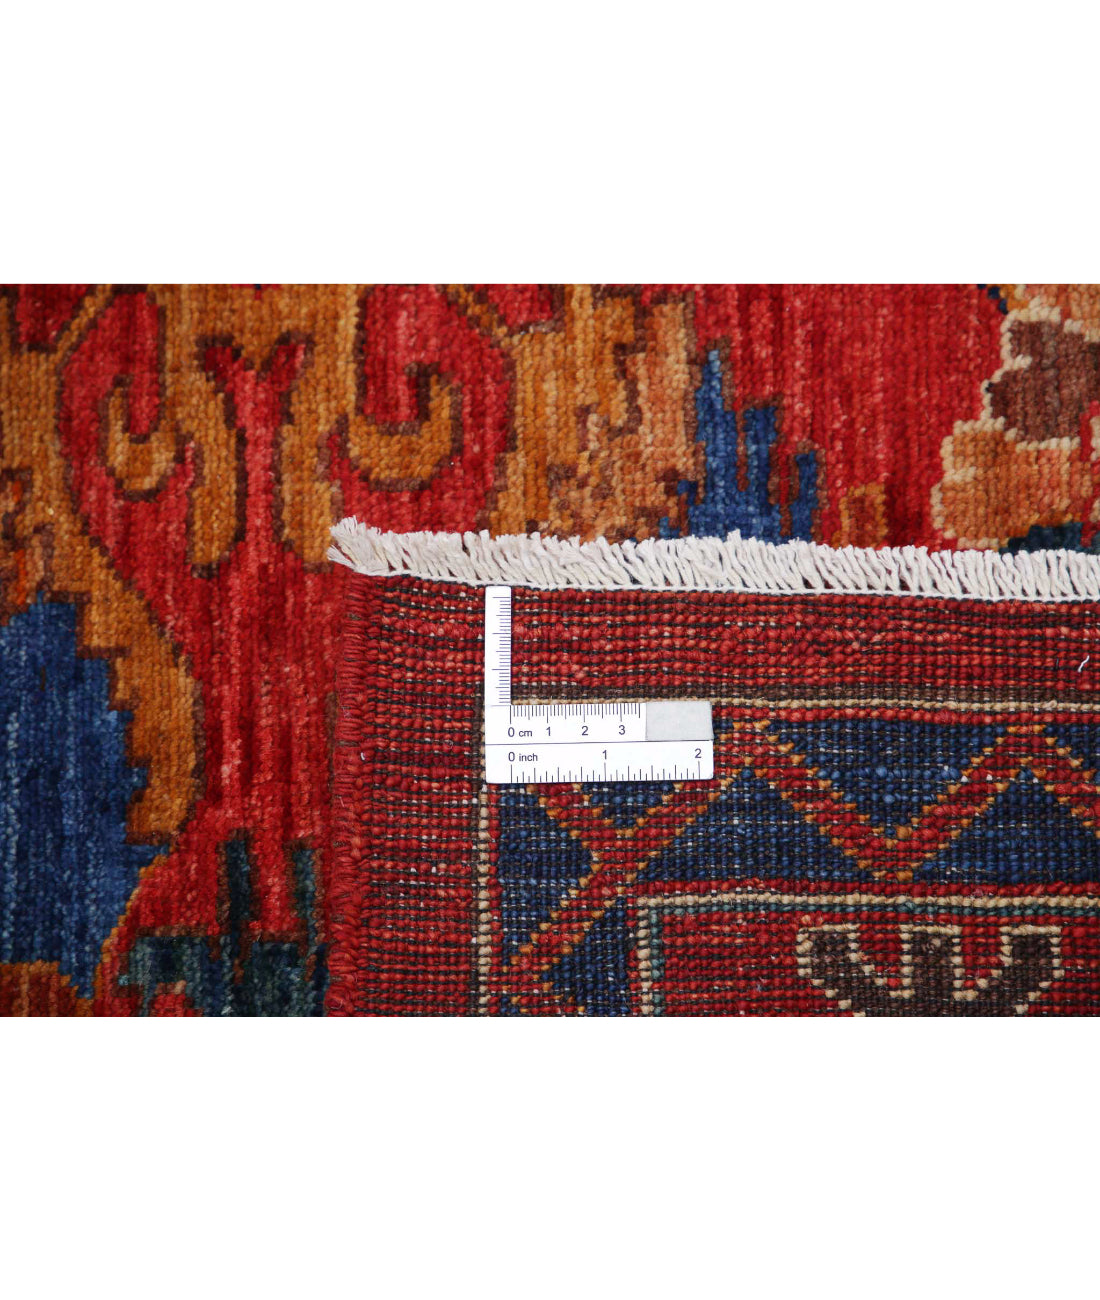 Hand Knotted Nomadic Caucasian Humna Wool Rug - 8'10'' x 11'5'' 8'10'' x 11'5'' (265 X 343) / Red / Blue